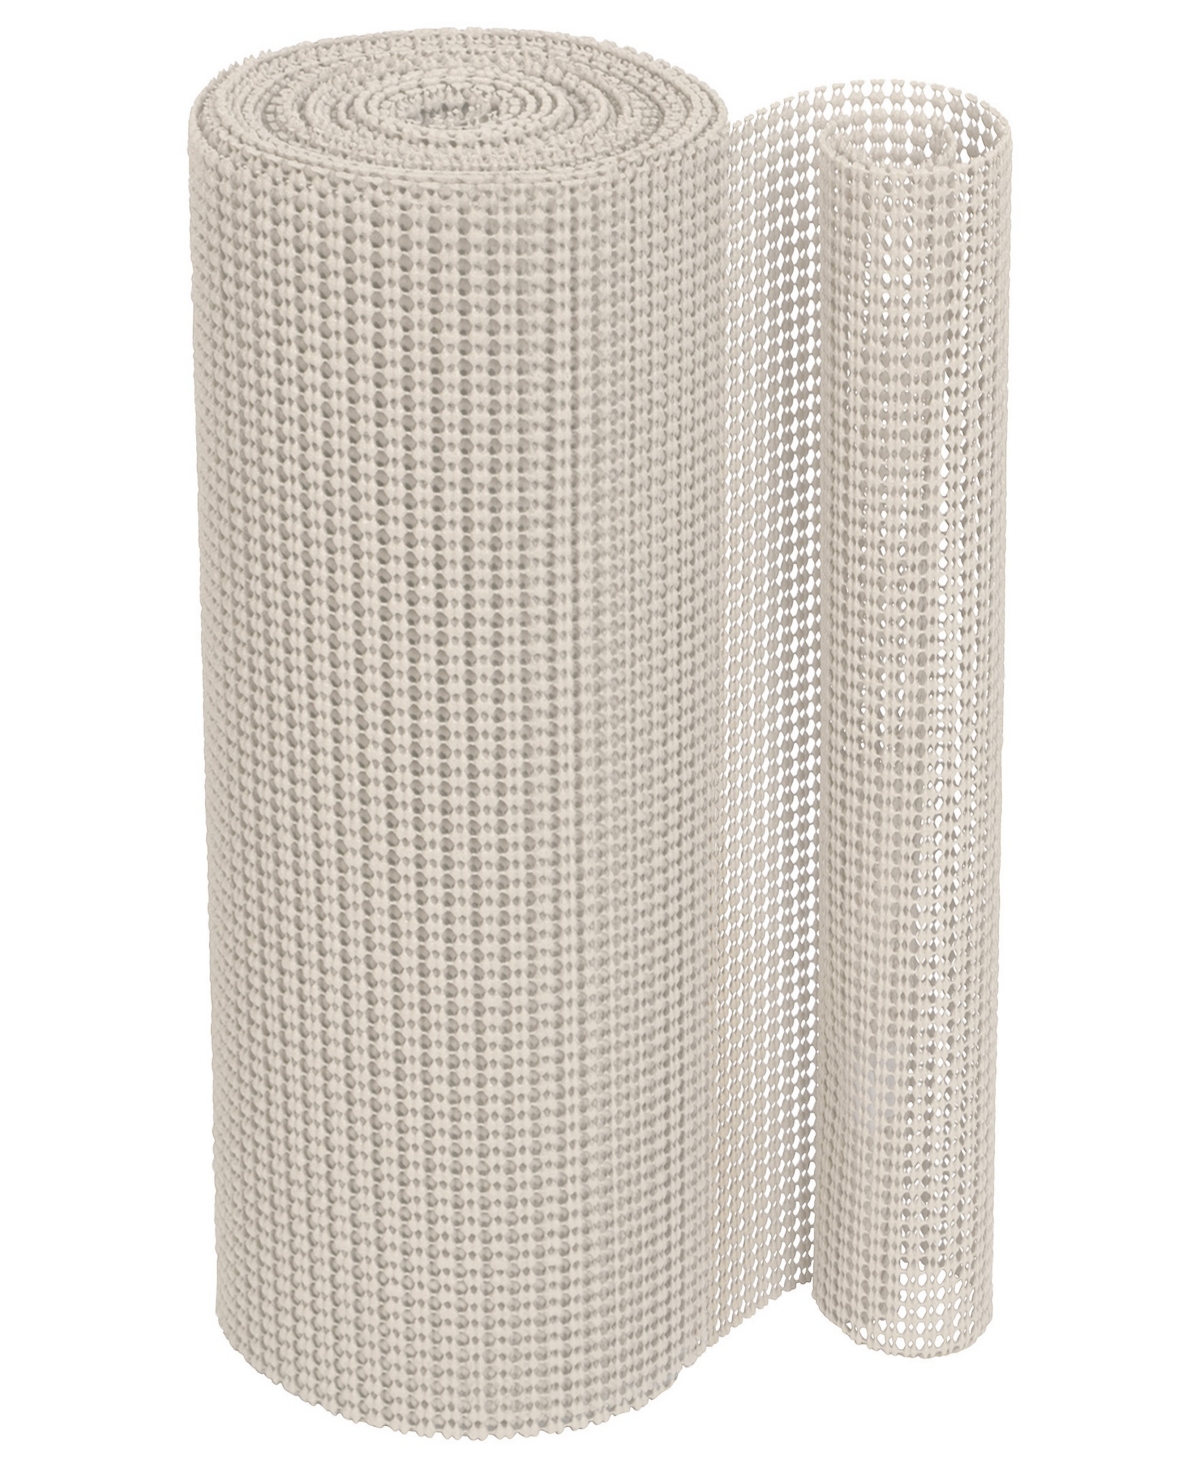 Classic Grip Shelf Liner, 12" x 10' Roll - Taupe